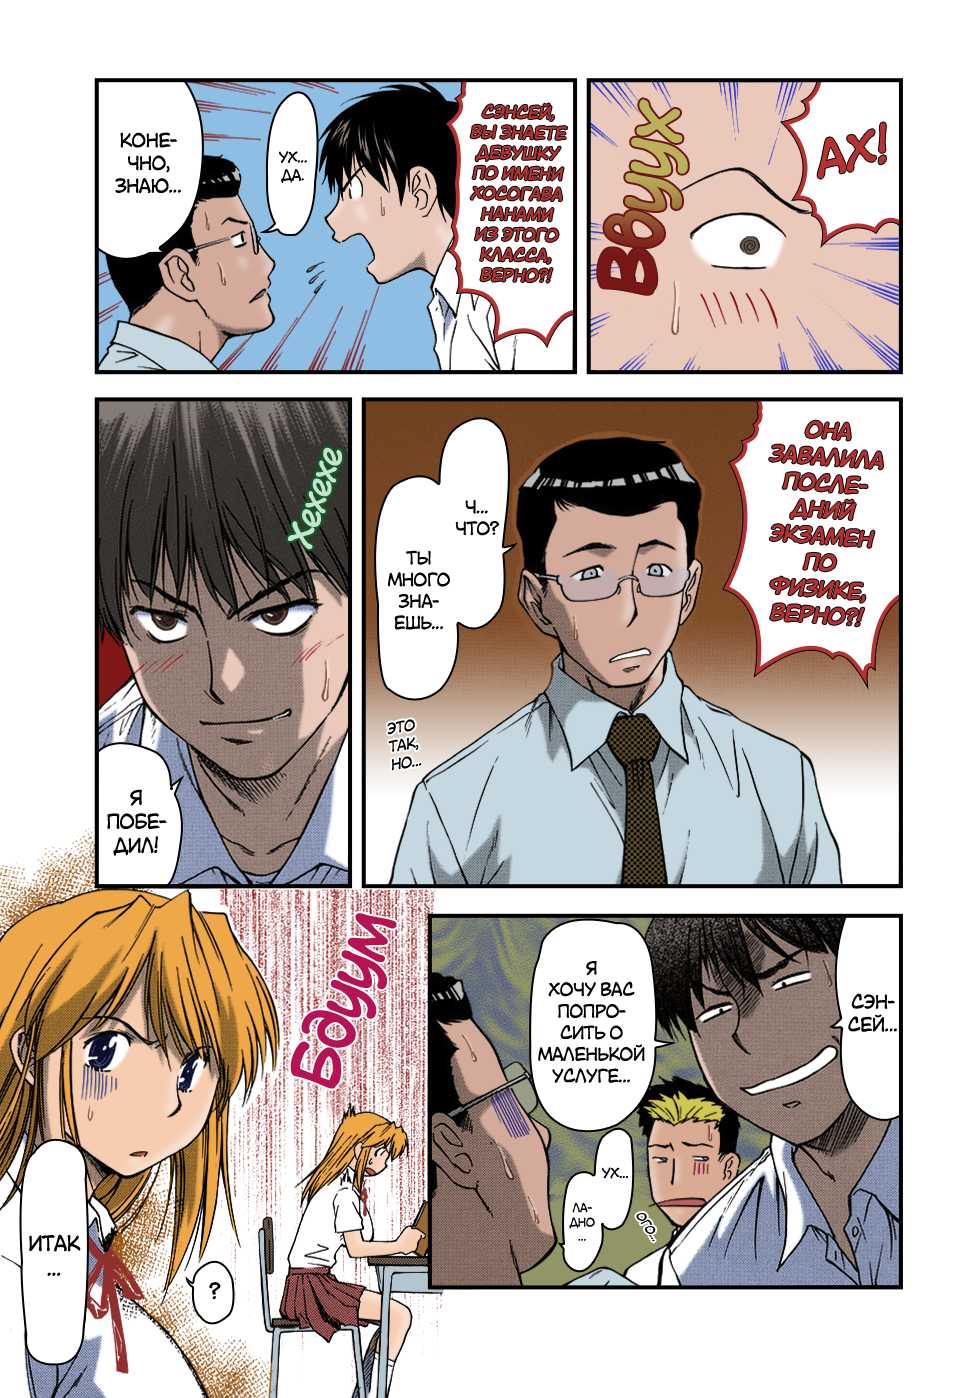 [Nagare Ippon] Offside Girl Ch. 1-5 [Russian] [Colorized] [Decensored] [WIP] - Page 12